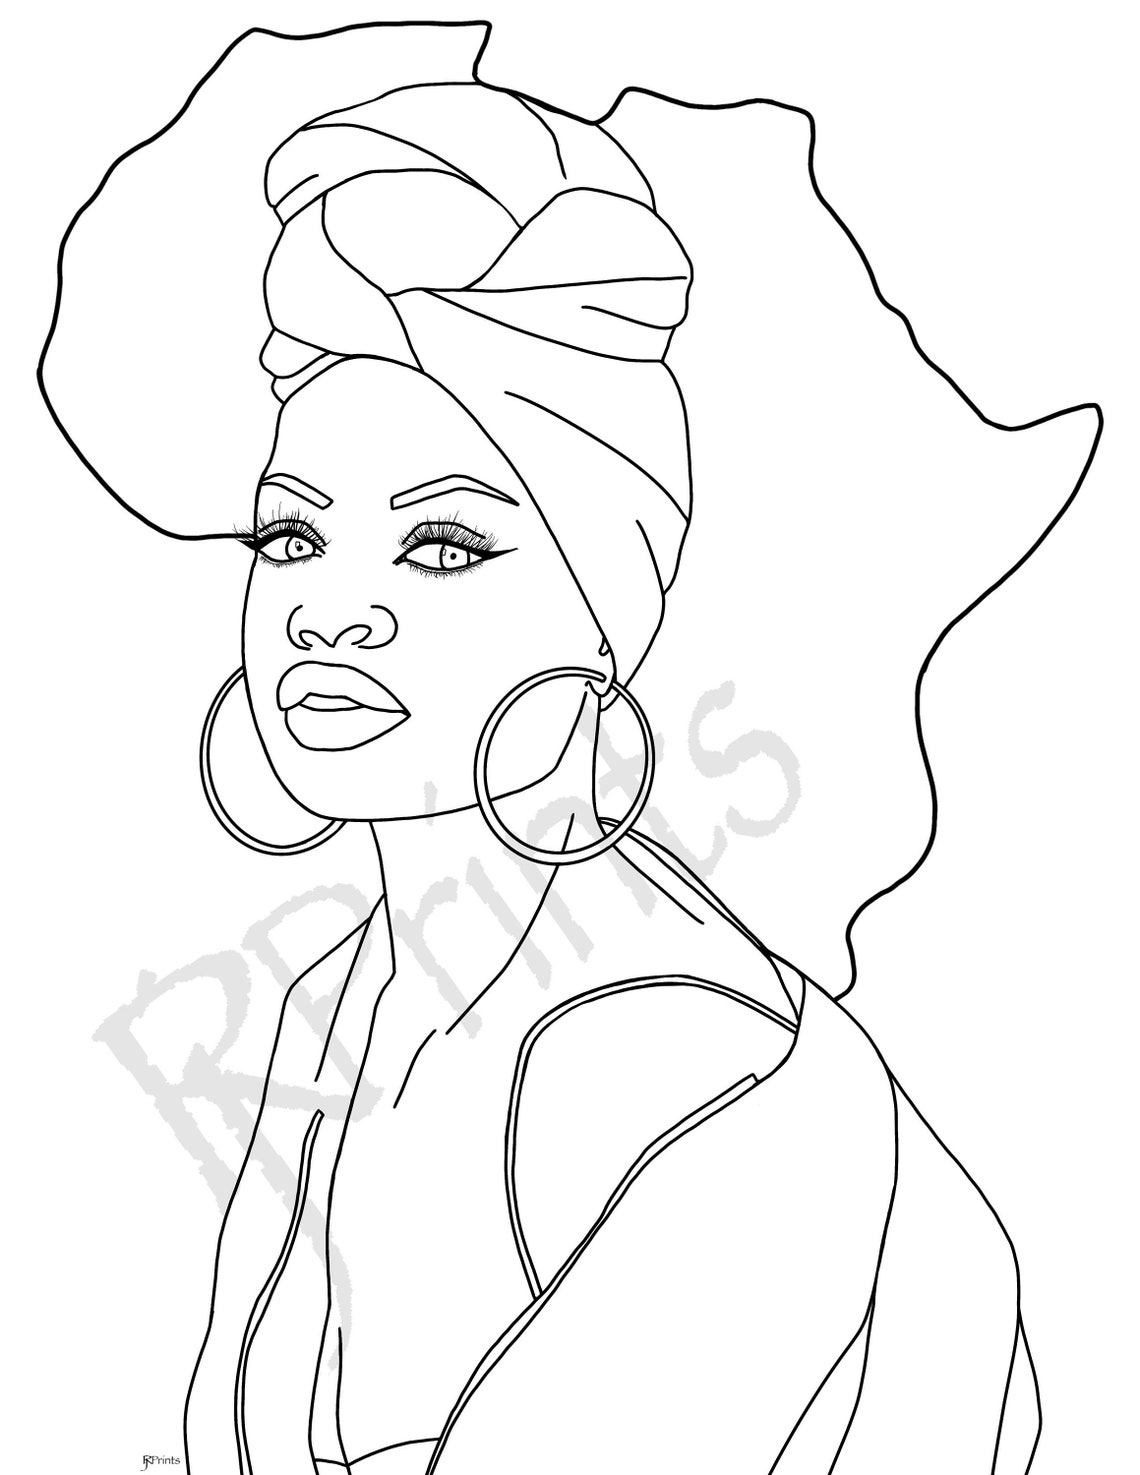 Black Women Adult Colouring Page Africa Queen instant - Etsy